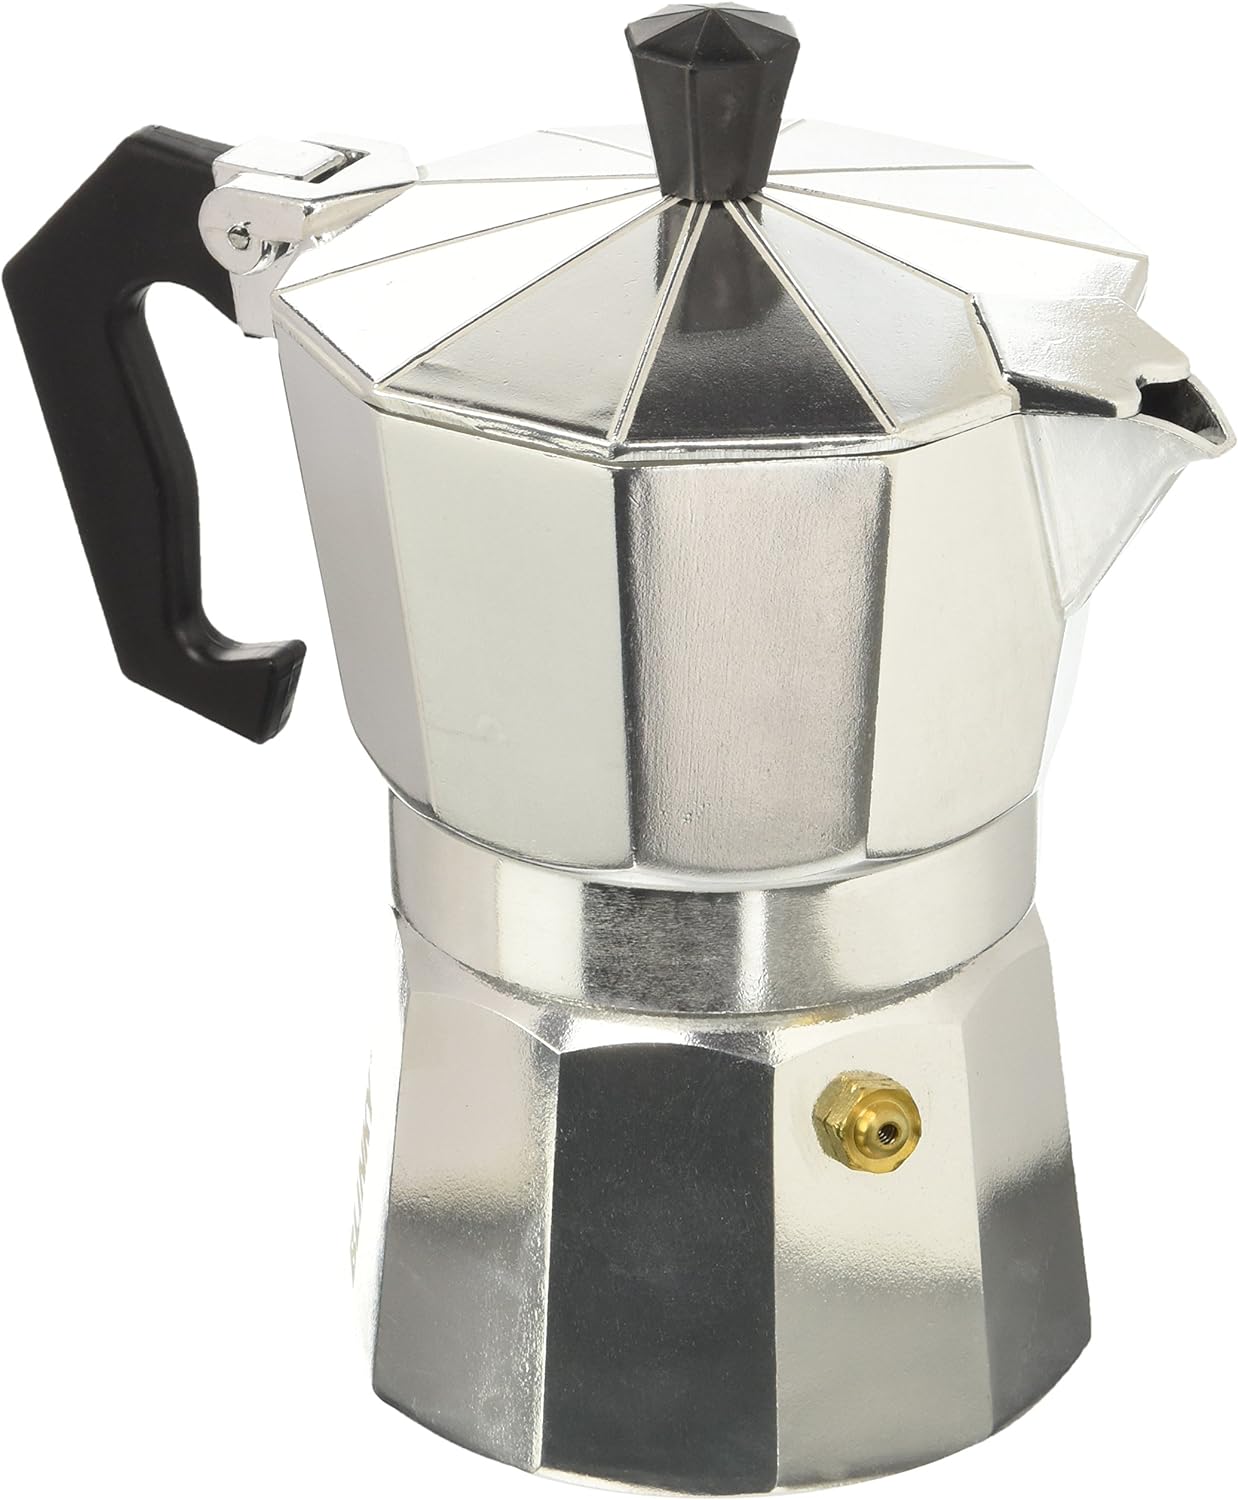 Blinky Espresso Maker for 3 Cups